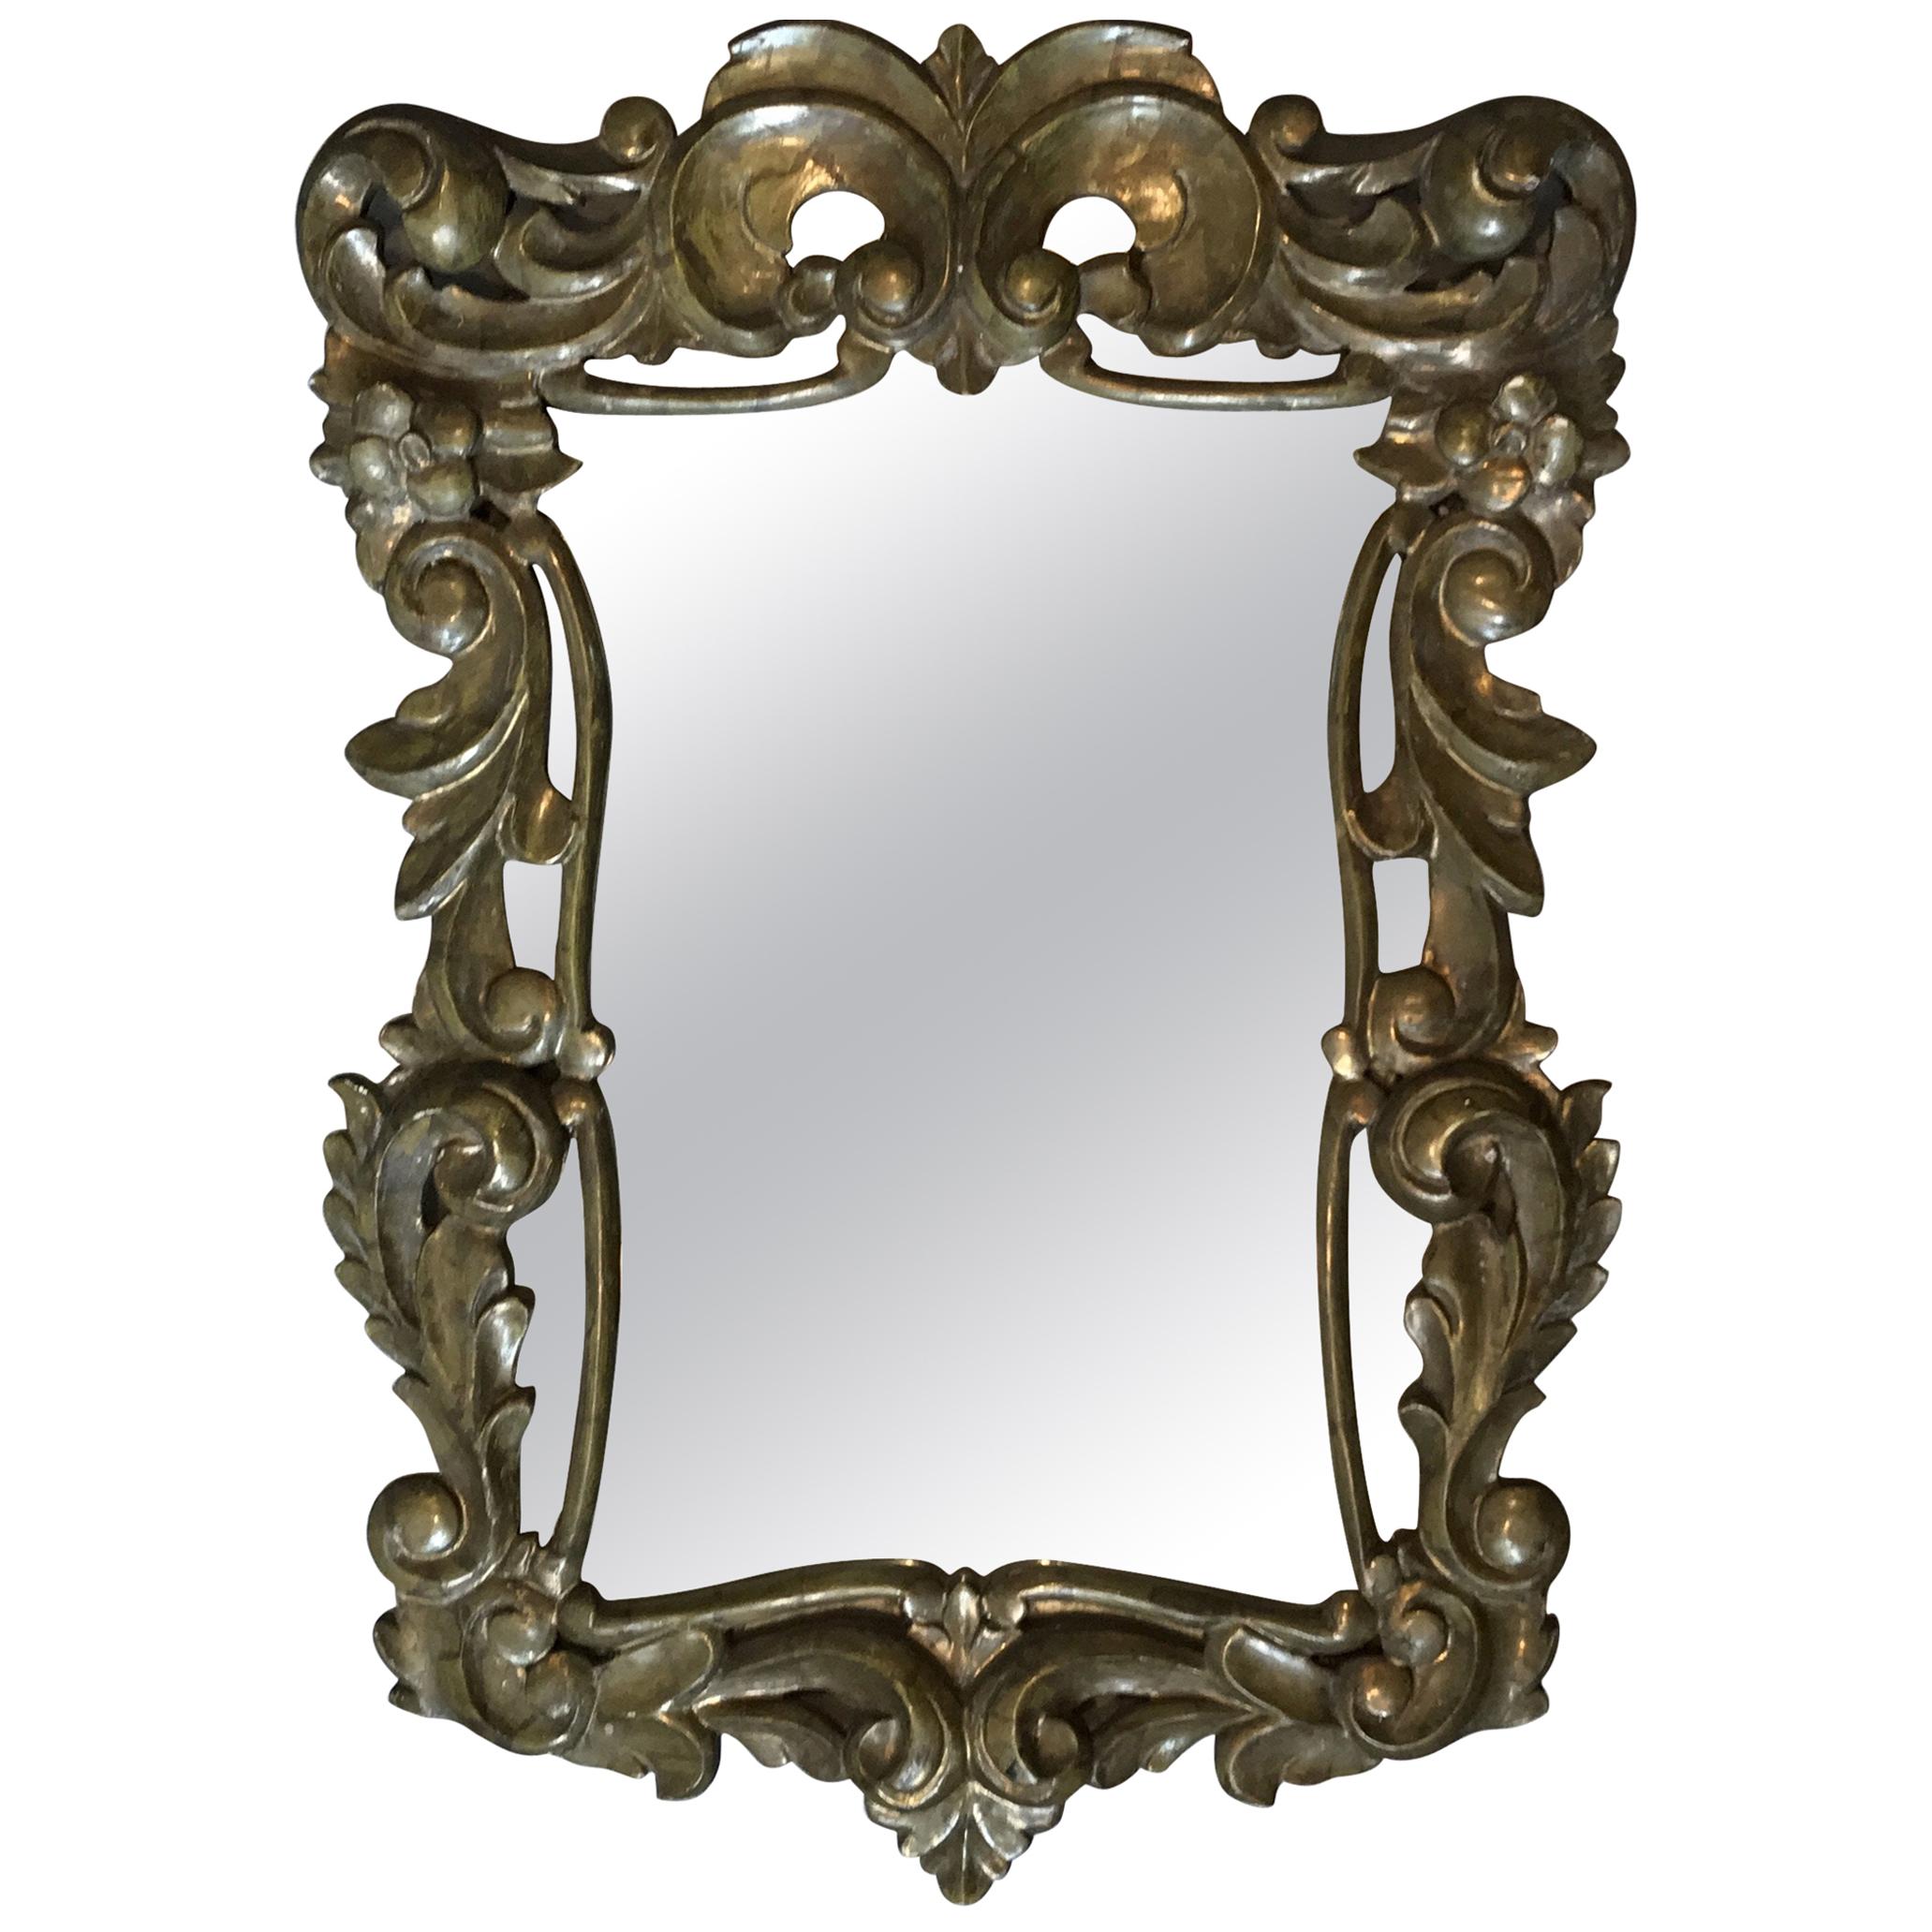 Lovely French Gold Pressed Brass Ornate Mirror